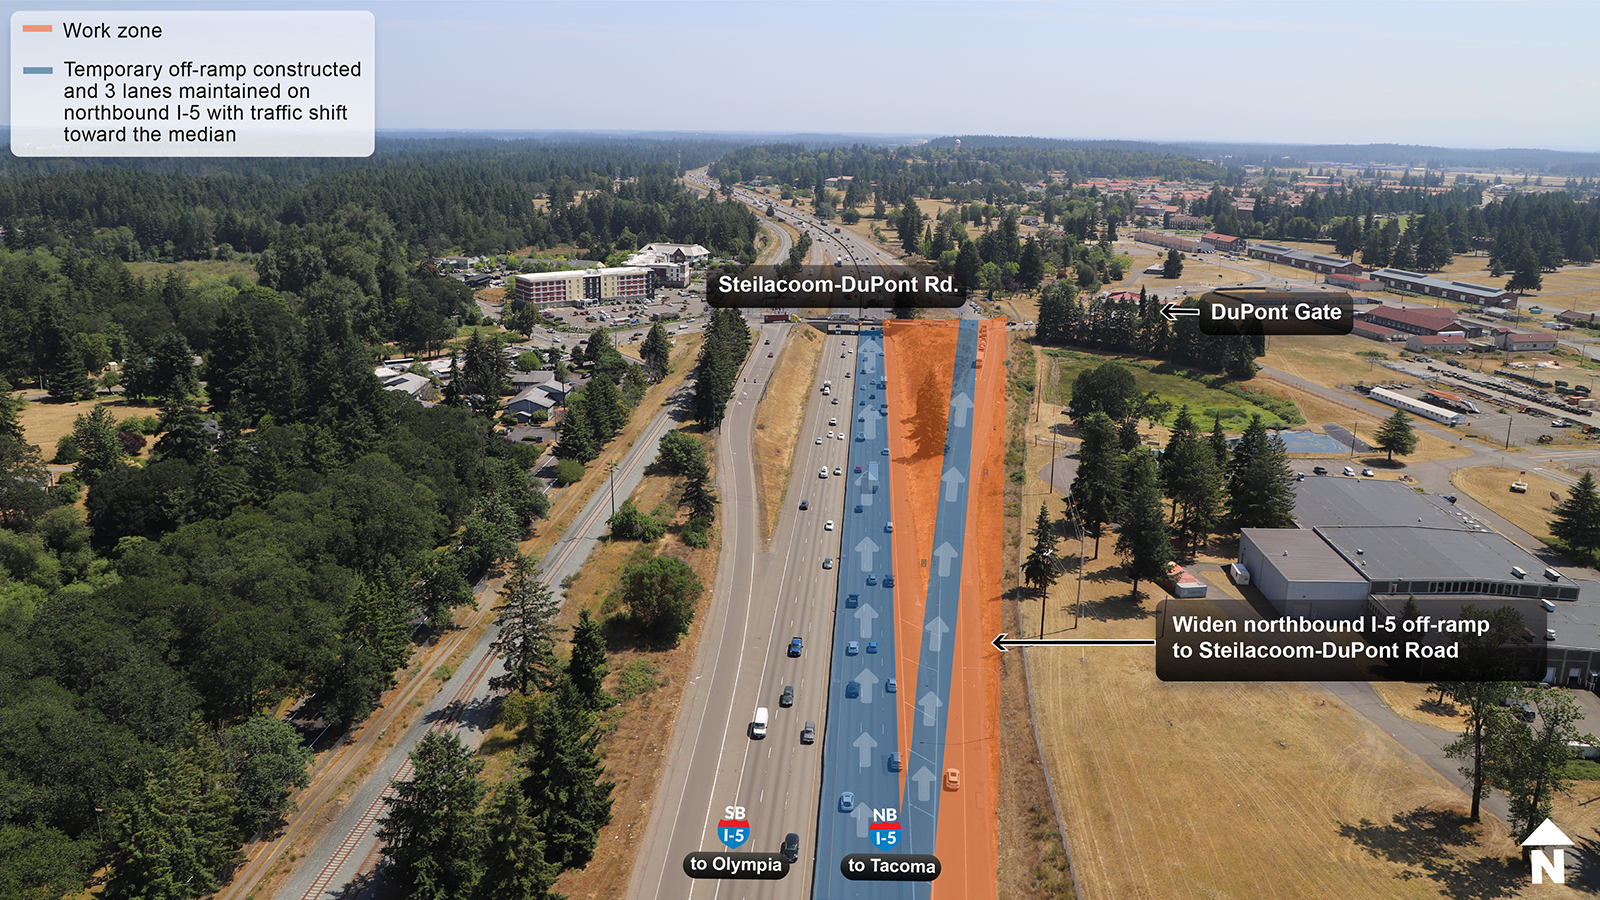 Map showing how three lanes of northbound I-5 will be maintained at Steilacoom-DuPont Road. The off-ramp will be shifted left to accommodate the work zone on the right